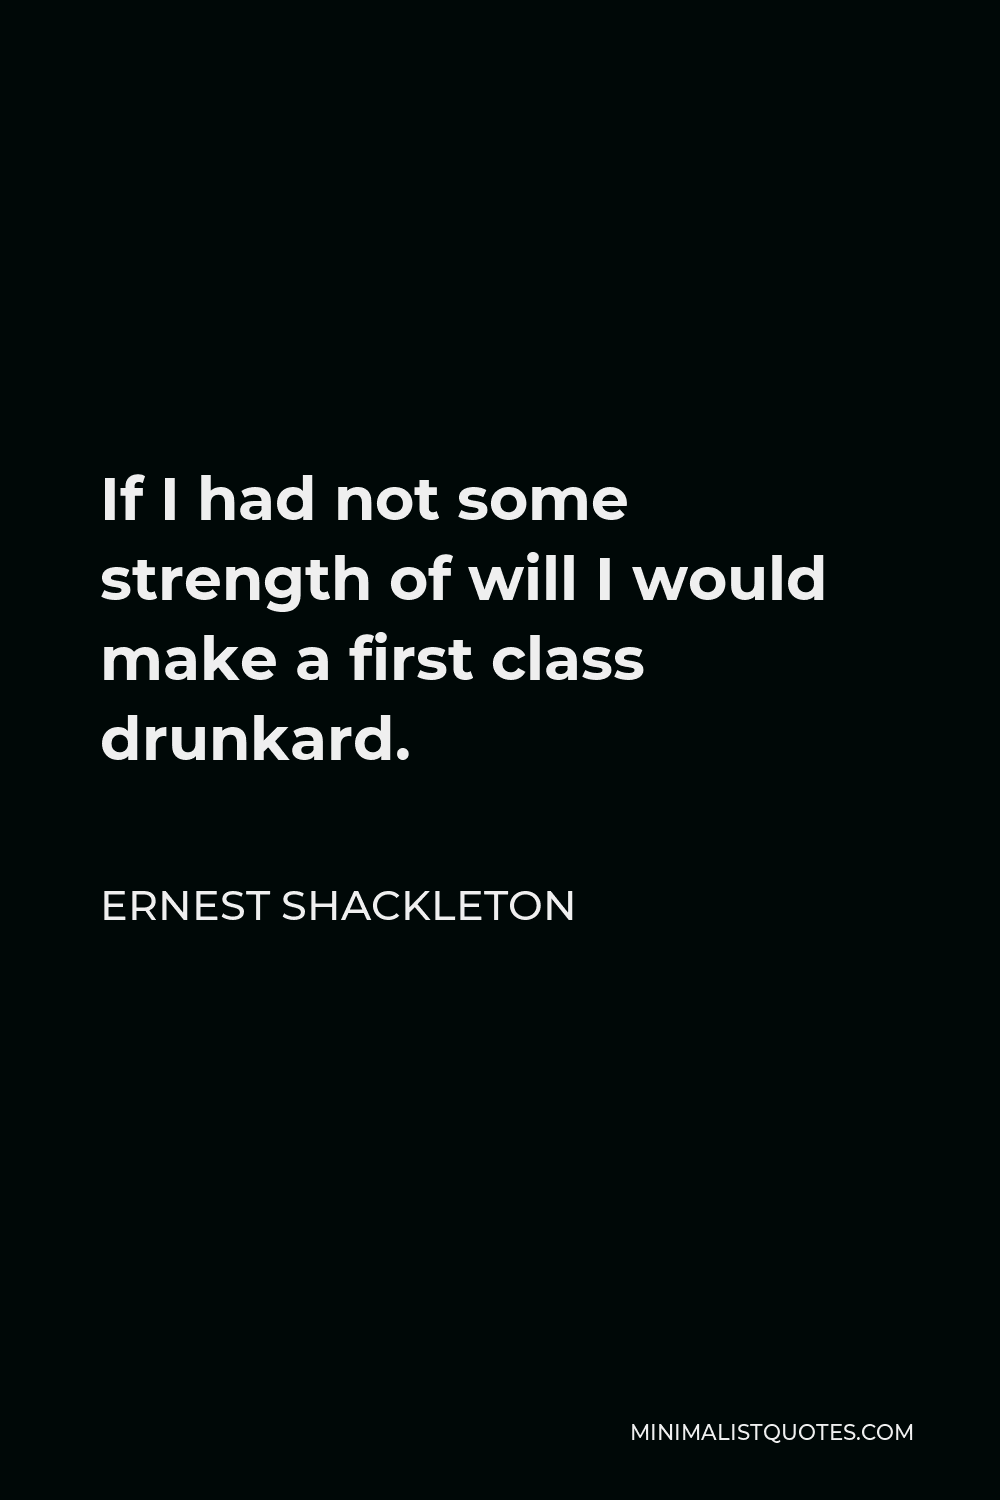 Ernest Shackleton Quote - If I had not some strength of will I would make a first class drunkard.